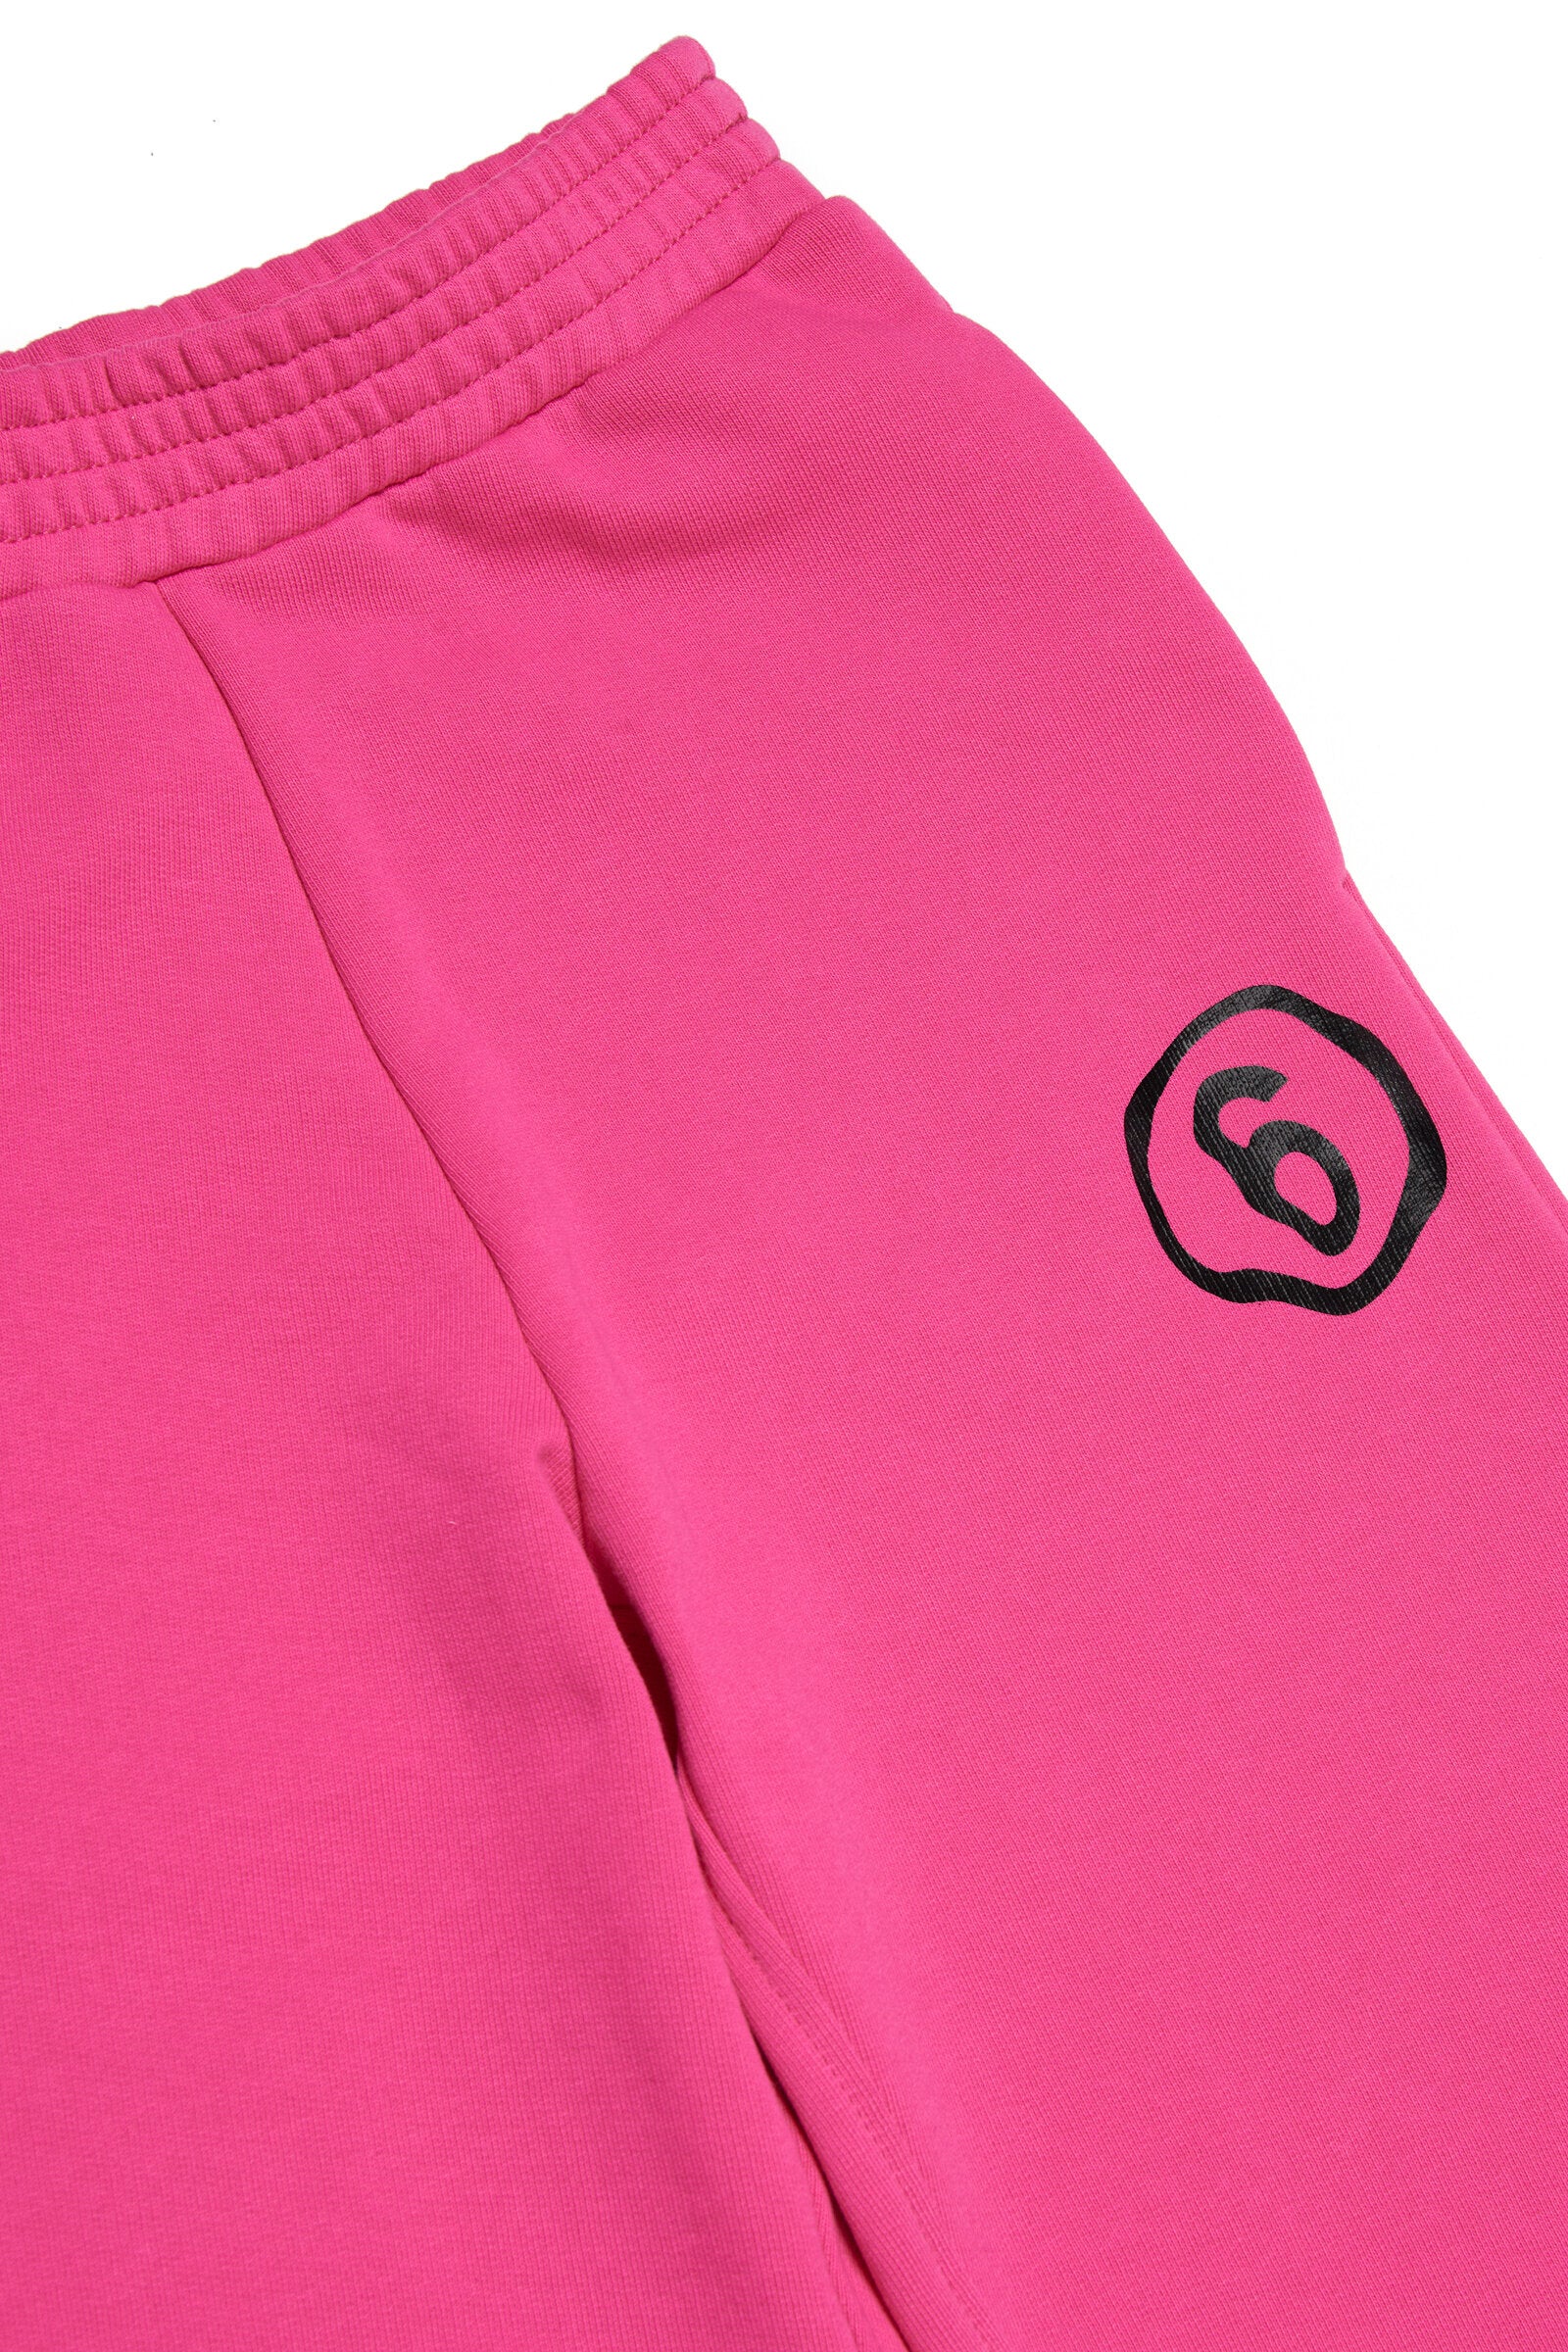 Pink fleece trousers with logo 6 and internal slits at the leg bottom